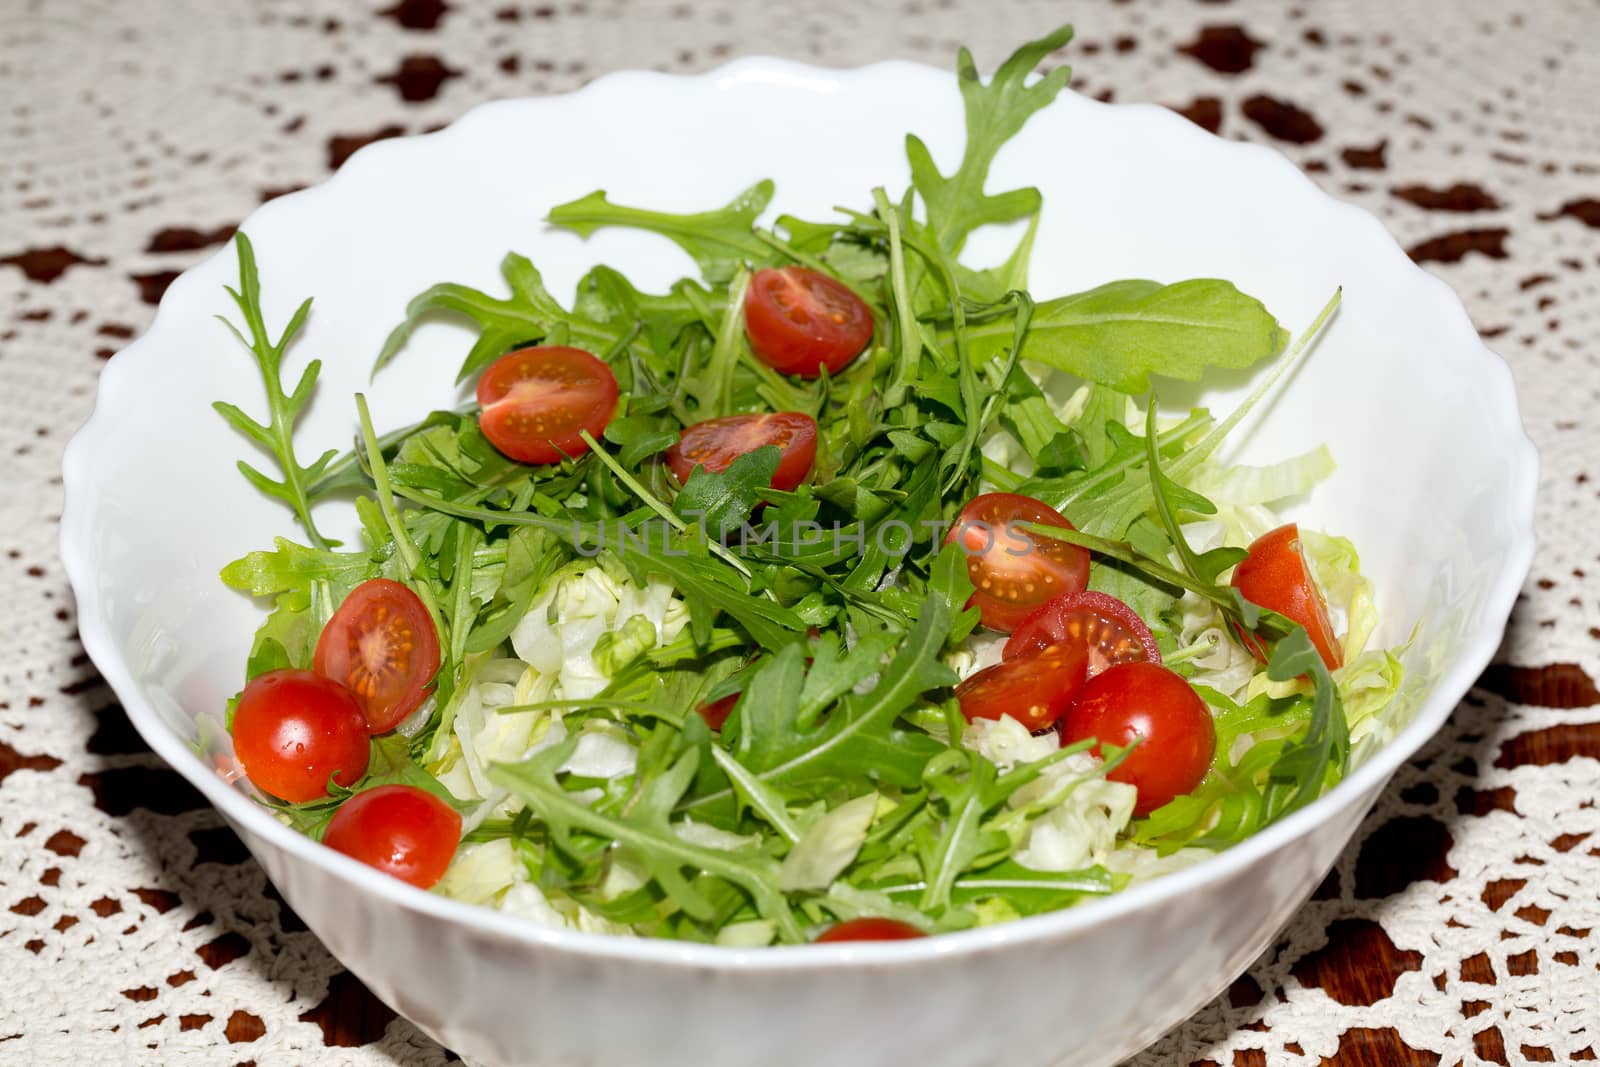 Heap of ruccola, lettuce leaves and cherry tomatoes